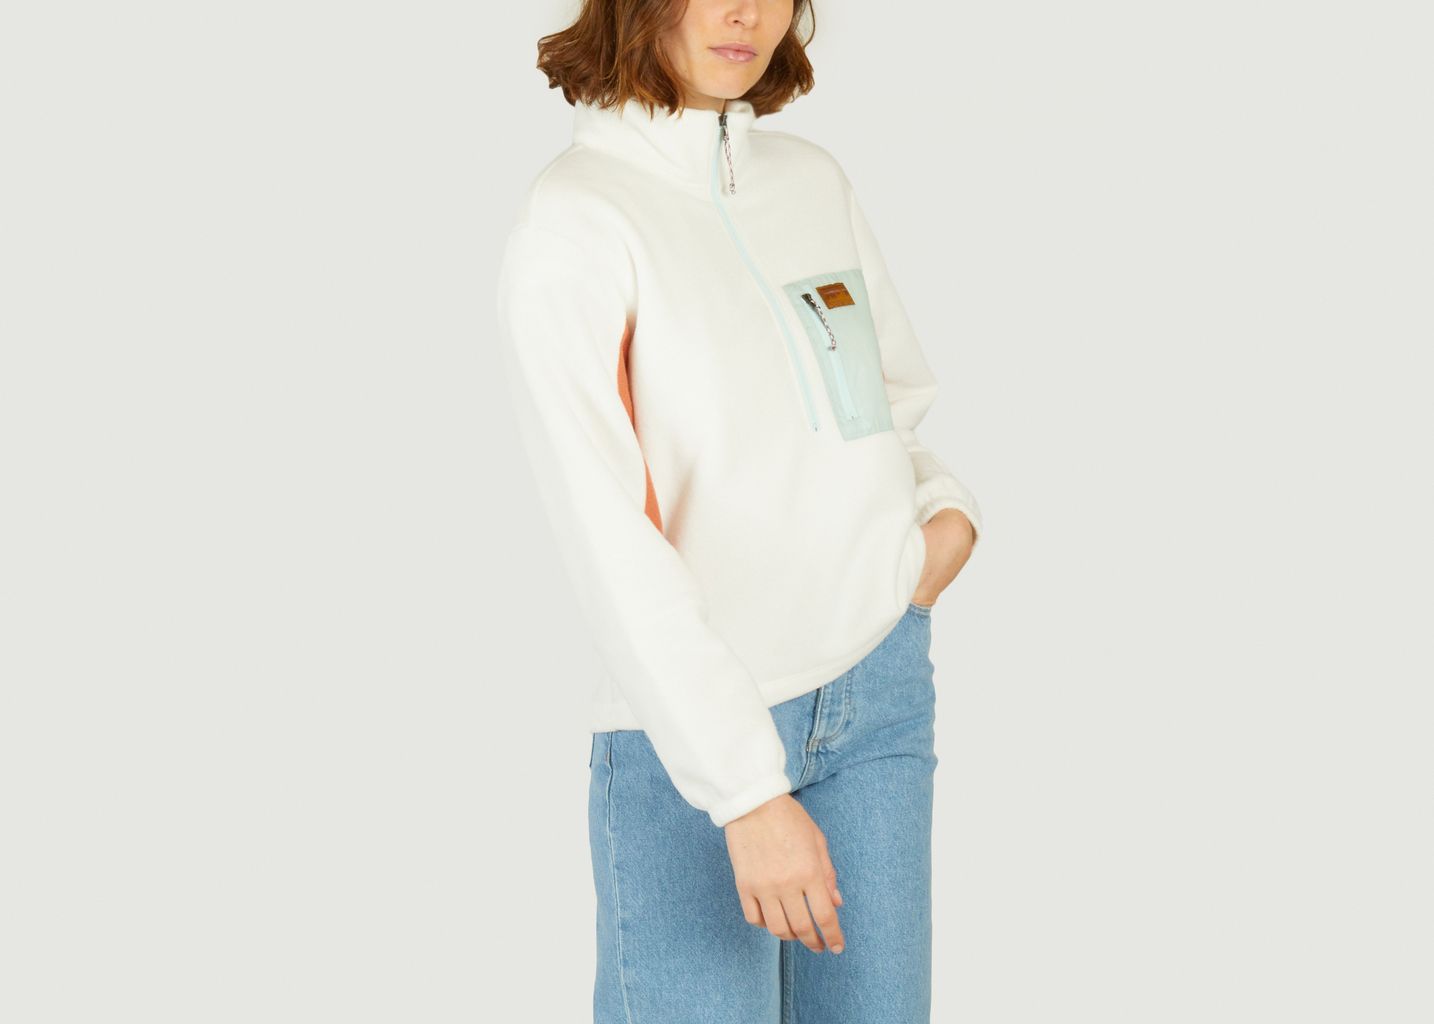 Fleece with trucker collar and contrasting details - Patagonia